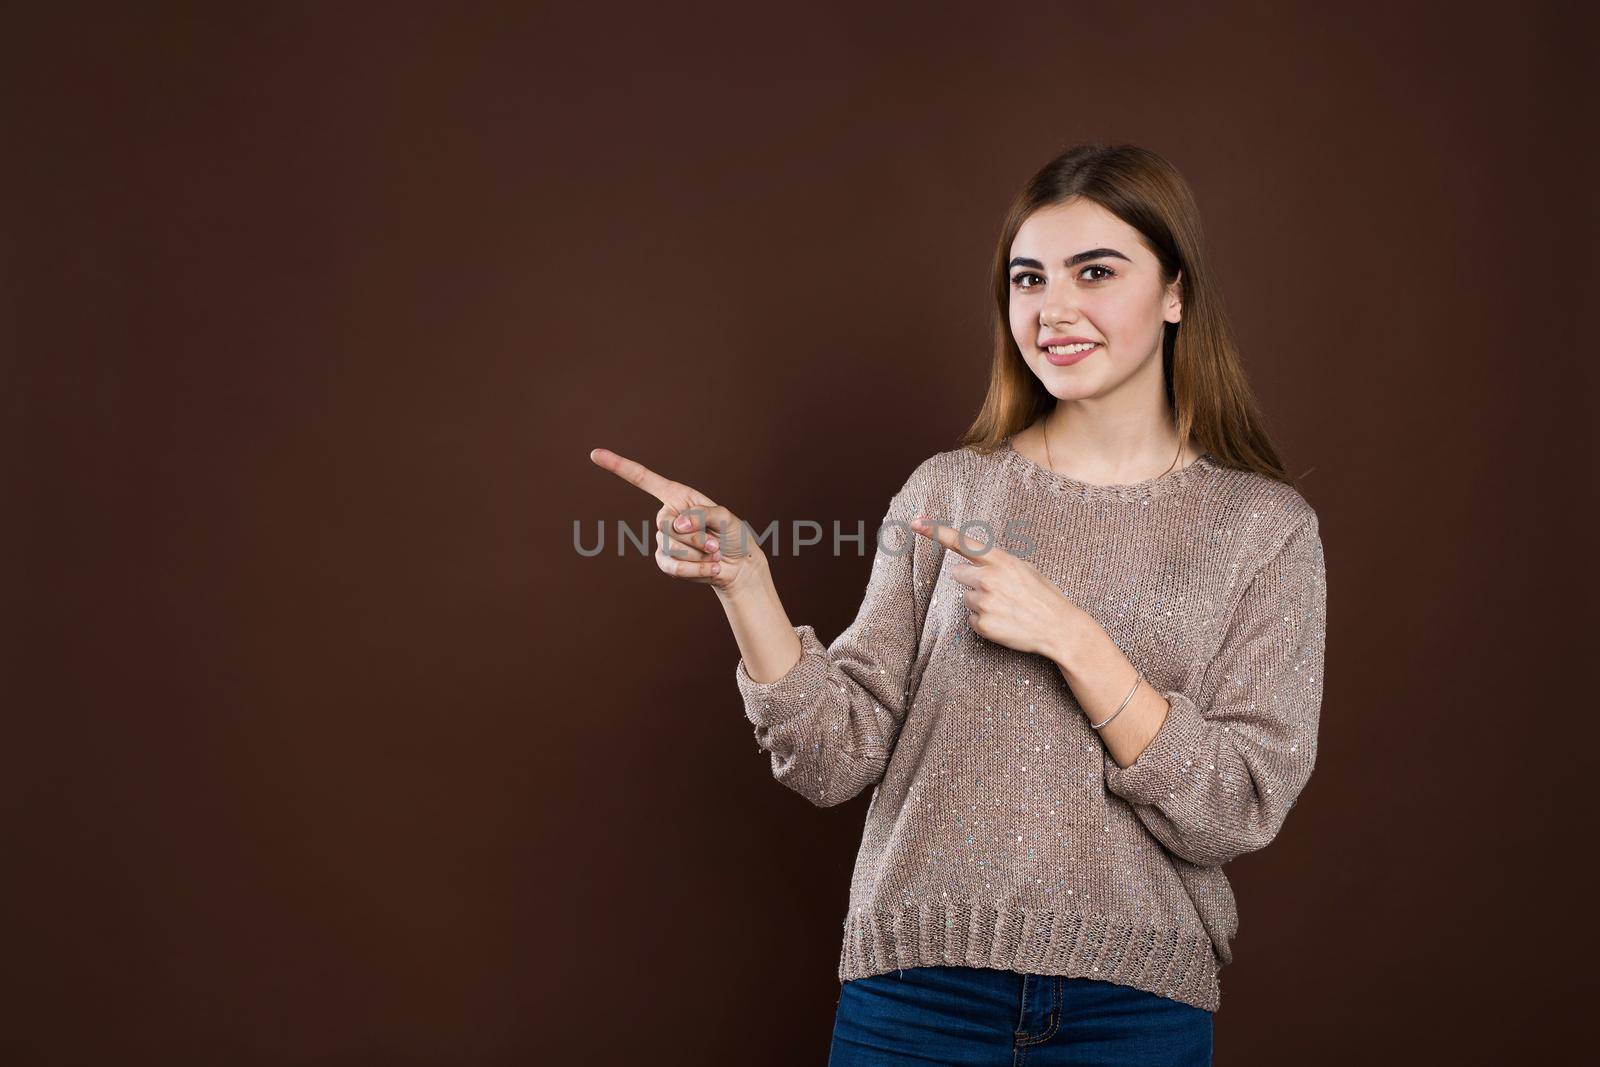 Smiling joyful woman in loose sweater posing against brown studio wall pointing at copy space for advertisment or promotional text. Positive emotions, feelings, joy, happiness